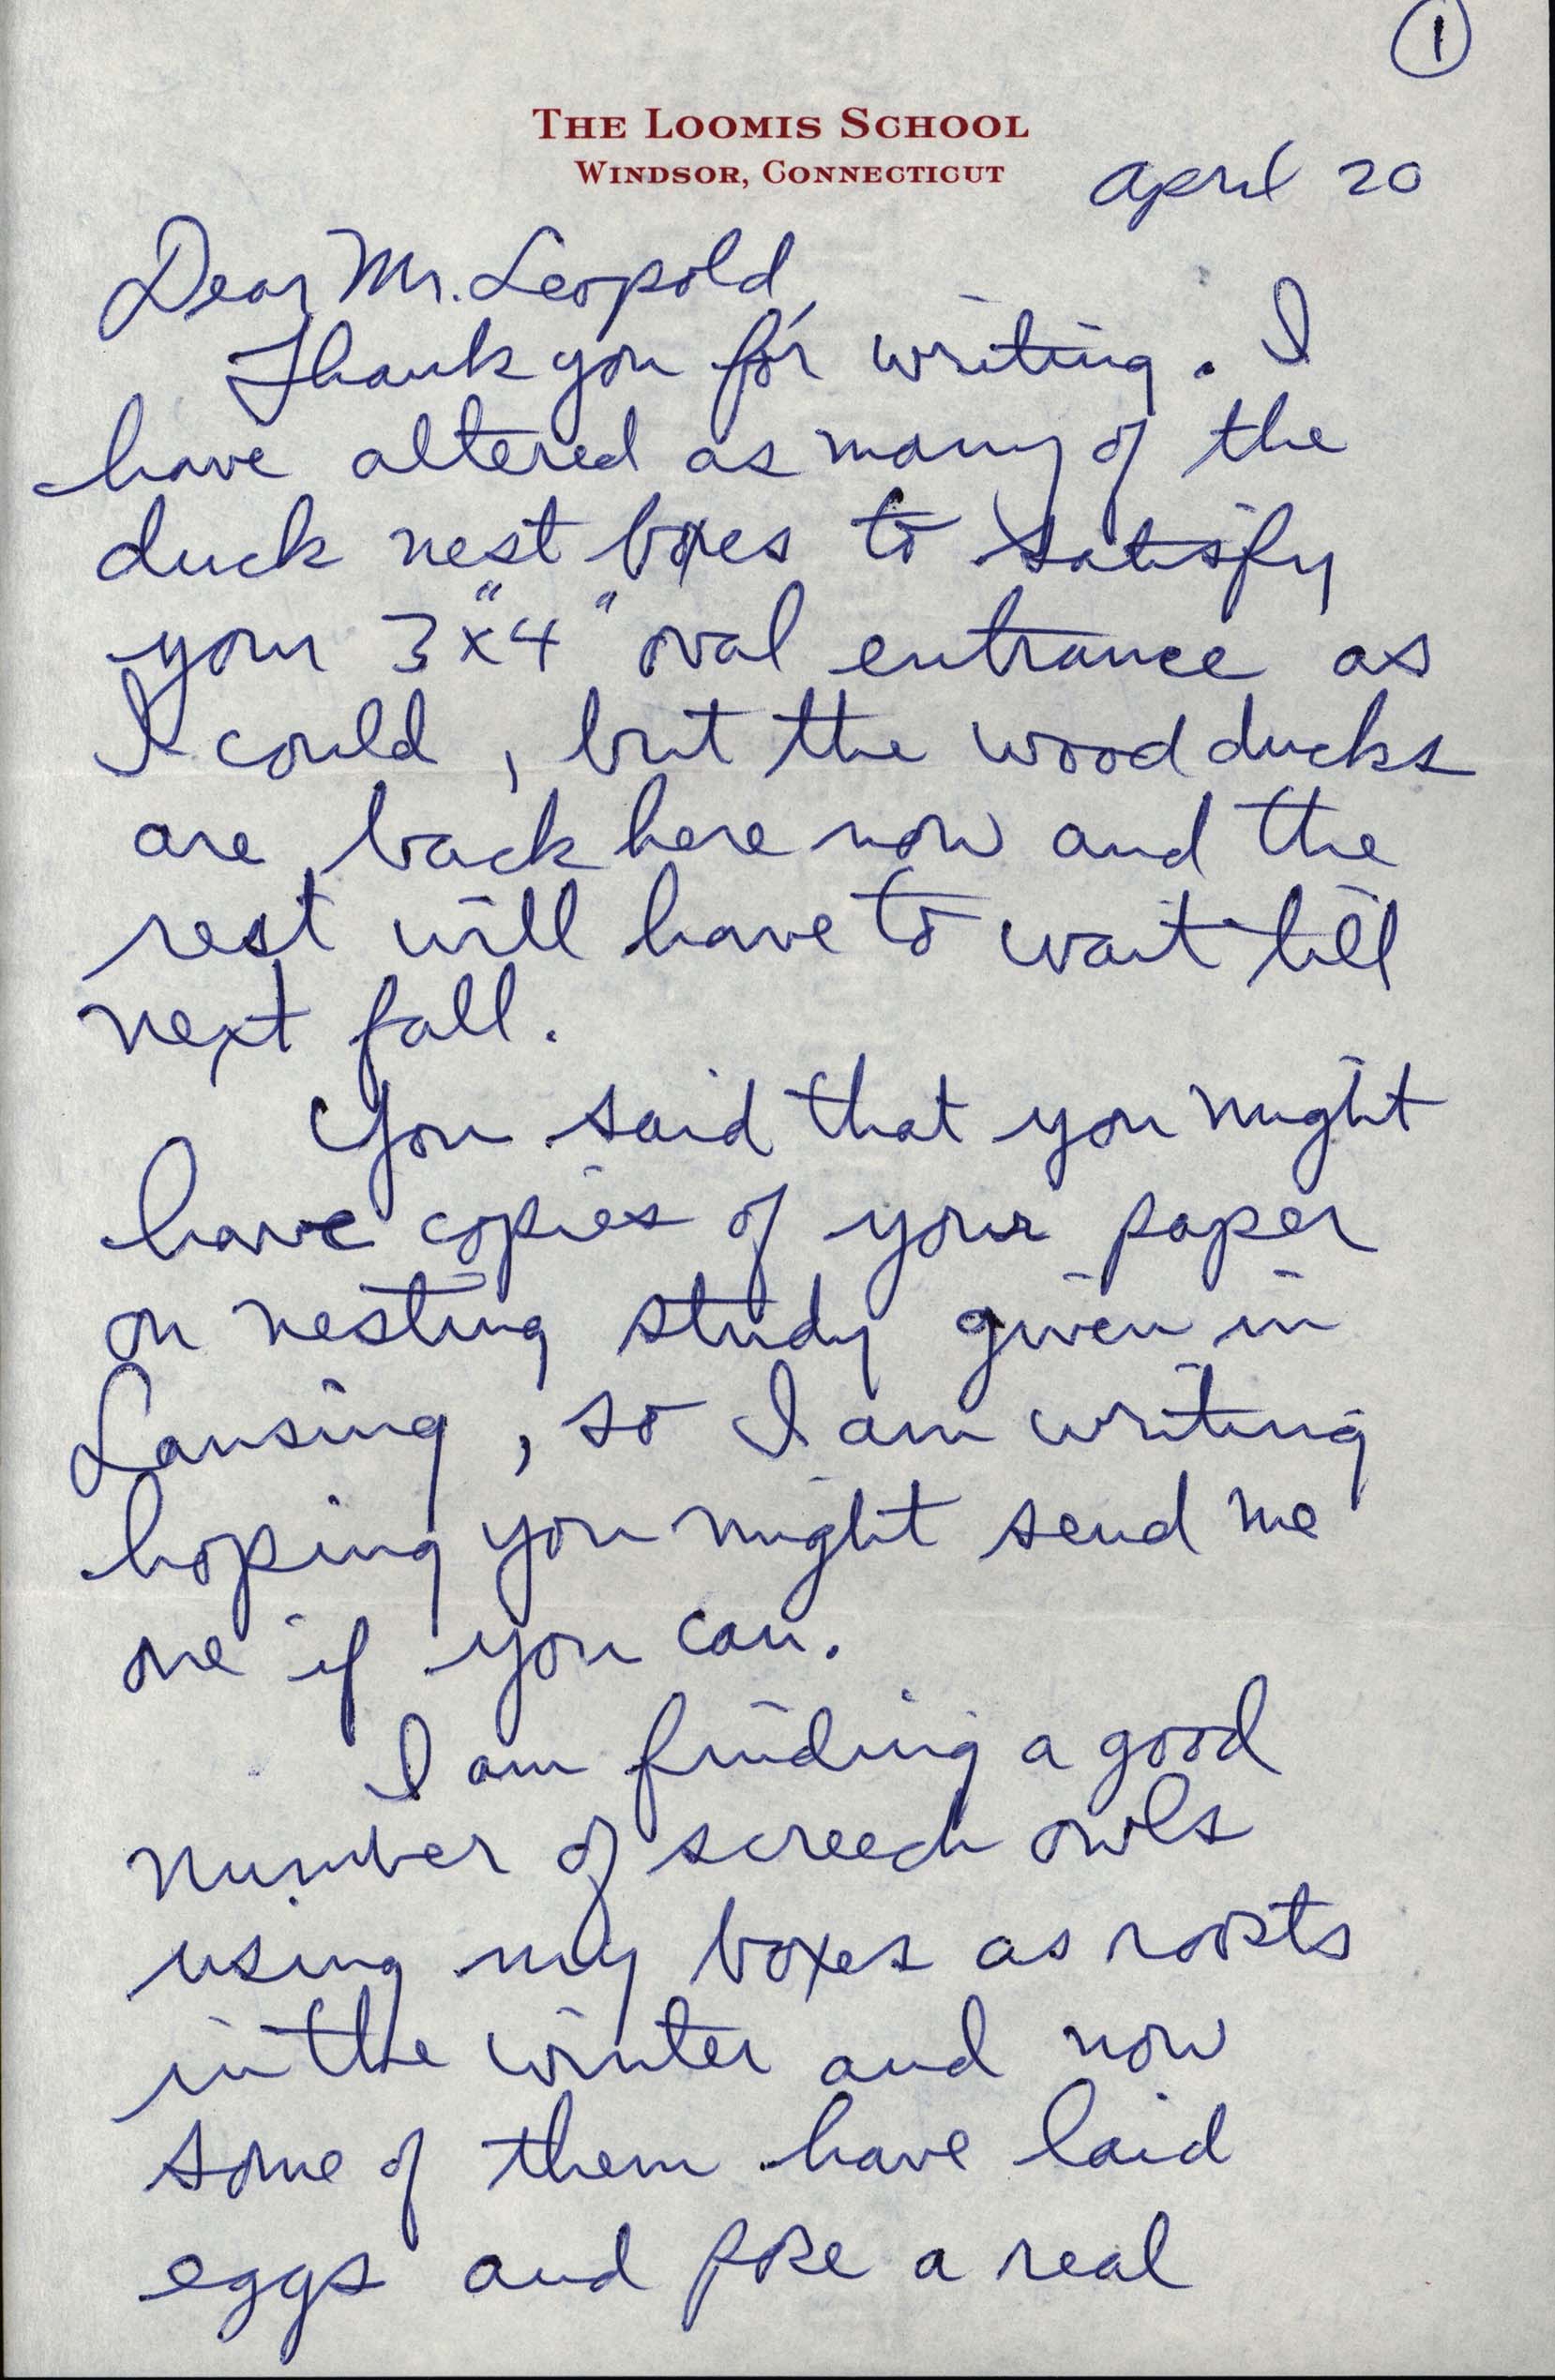 Don Joffray letter to Frederic Leopold regarding Wood Duck houses and nest takeover and predation, April 20, 1966